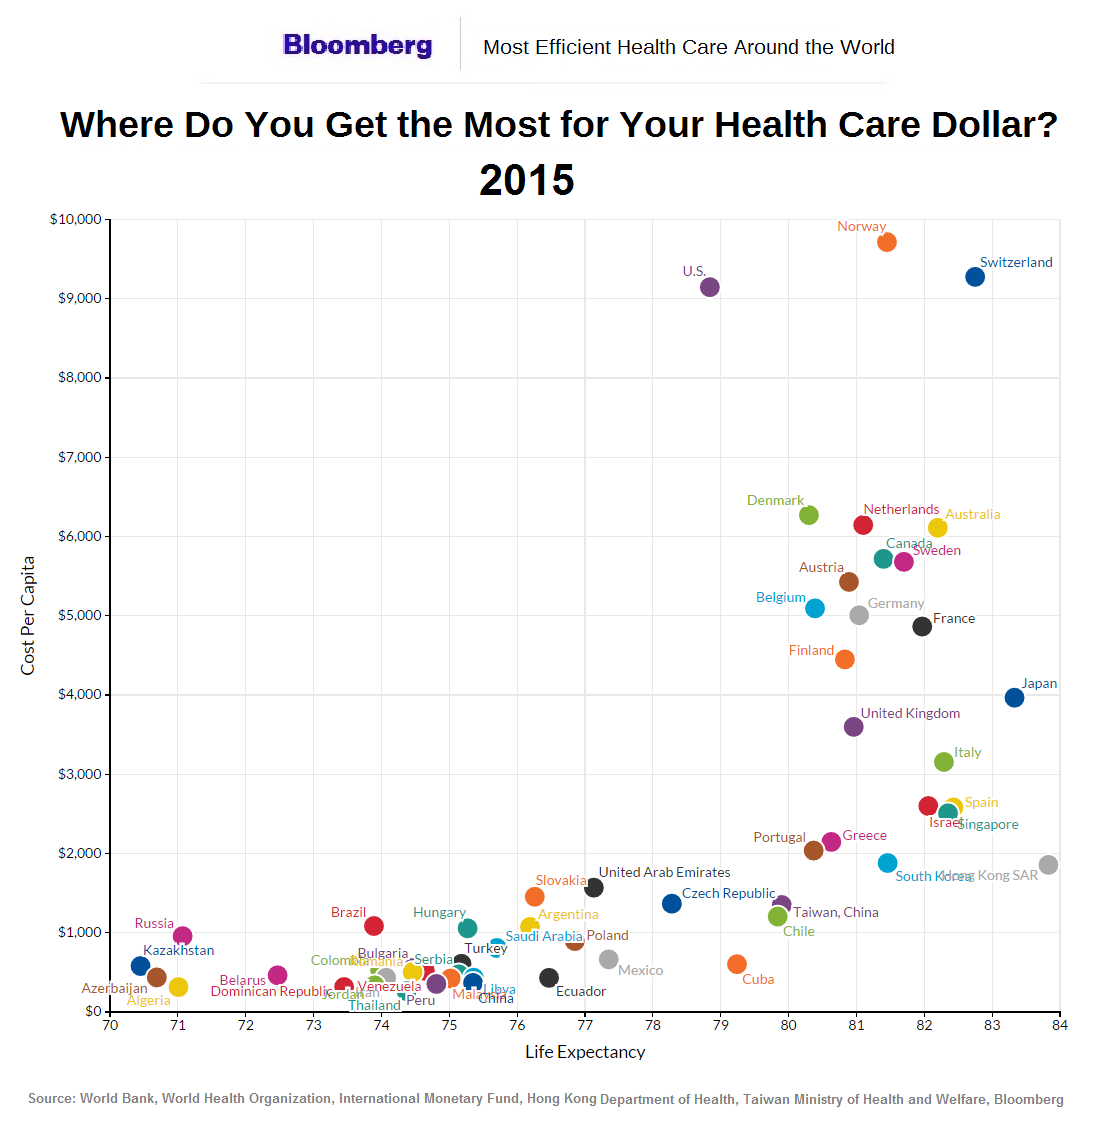 healthcare-efficiency-and-life-expentancy-by-nation-2015